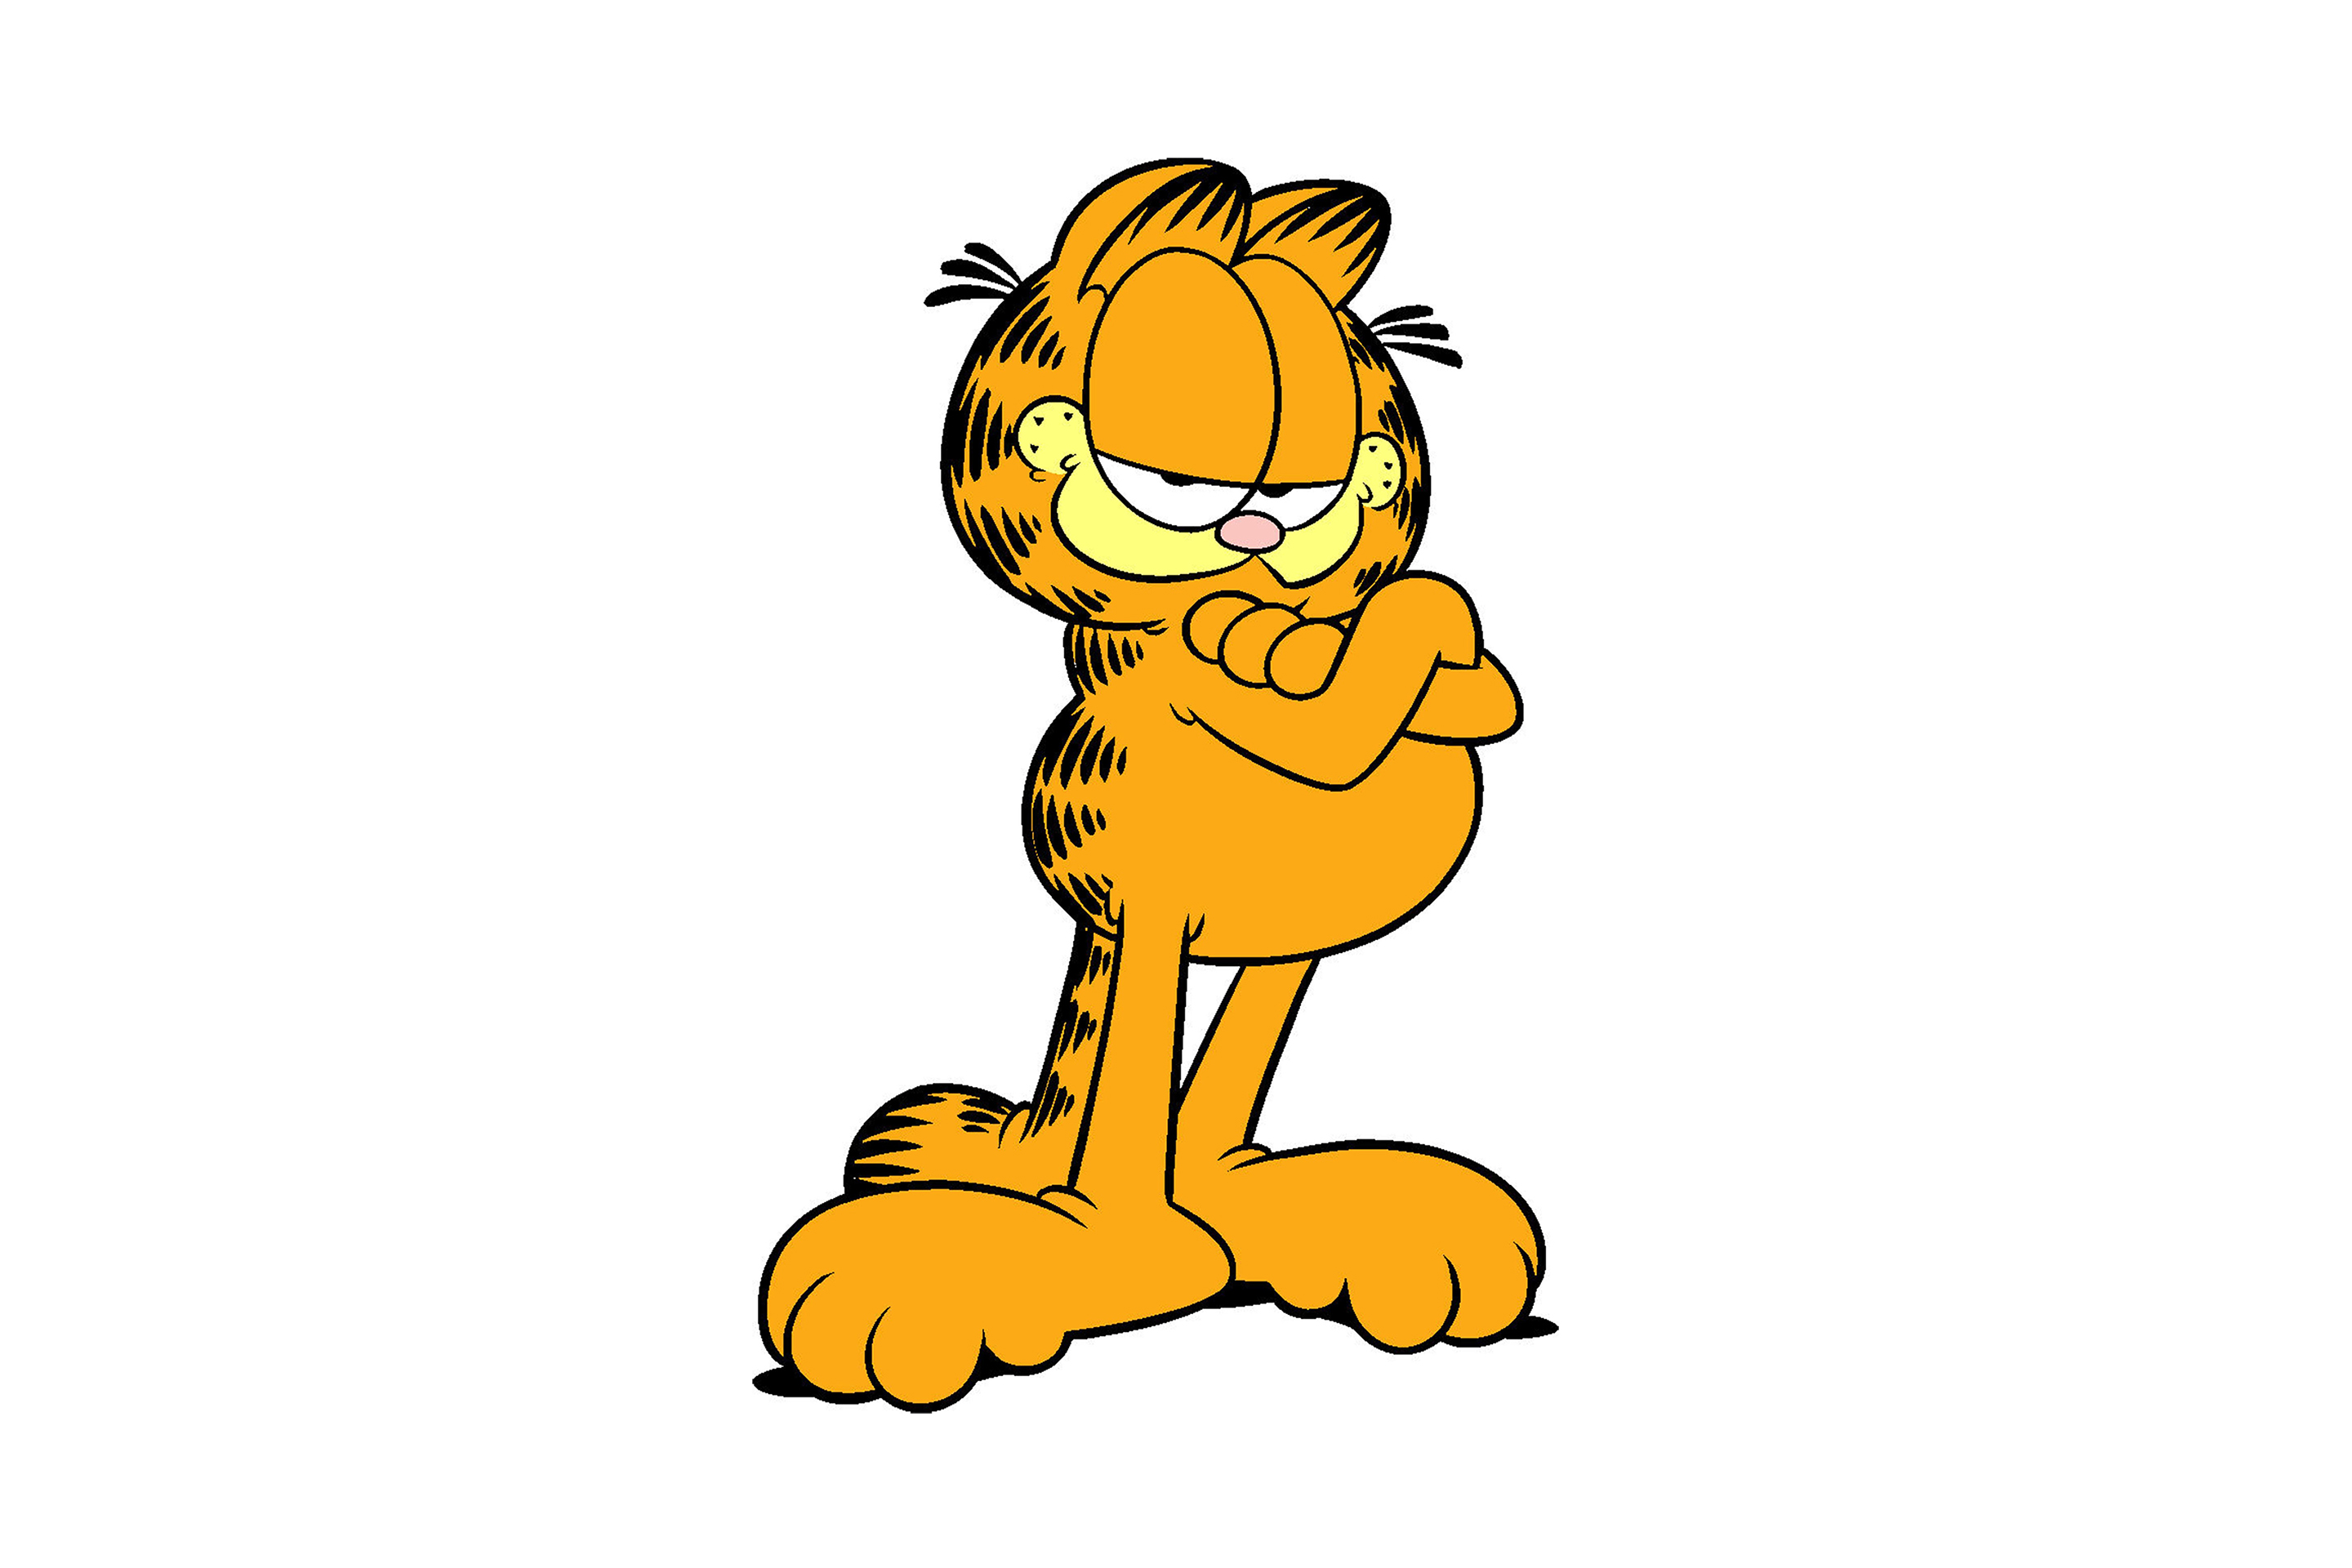 Viacom Buys Garfield in Big, Fat, Hairy Deal.